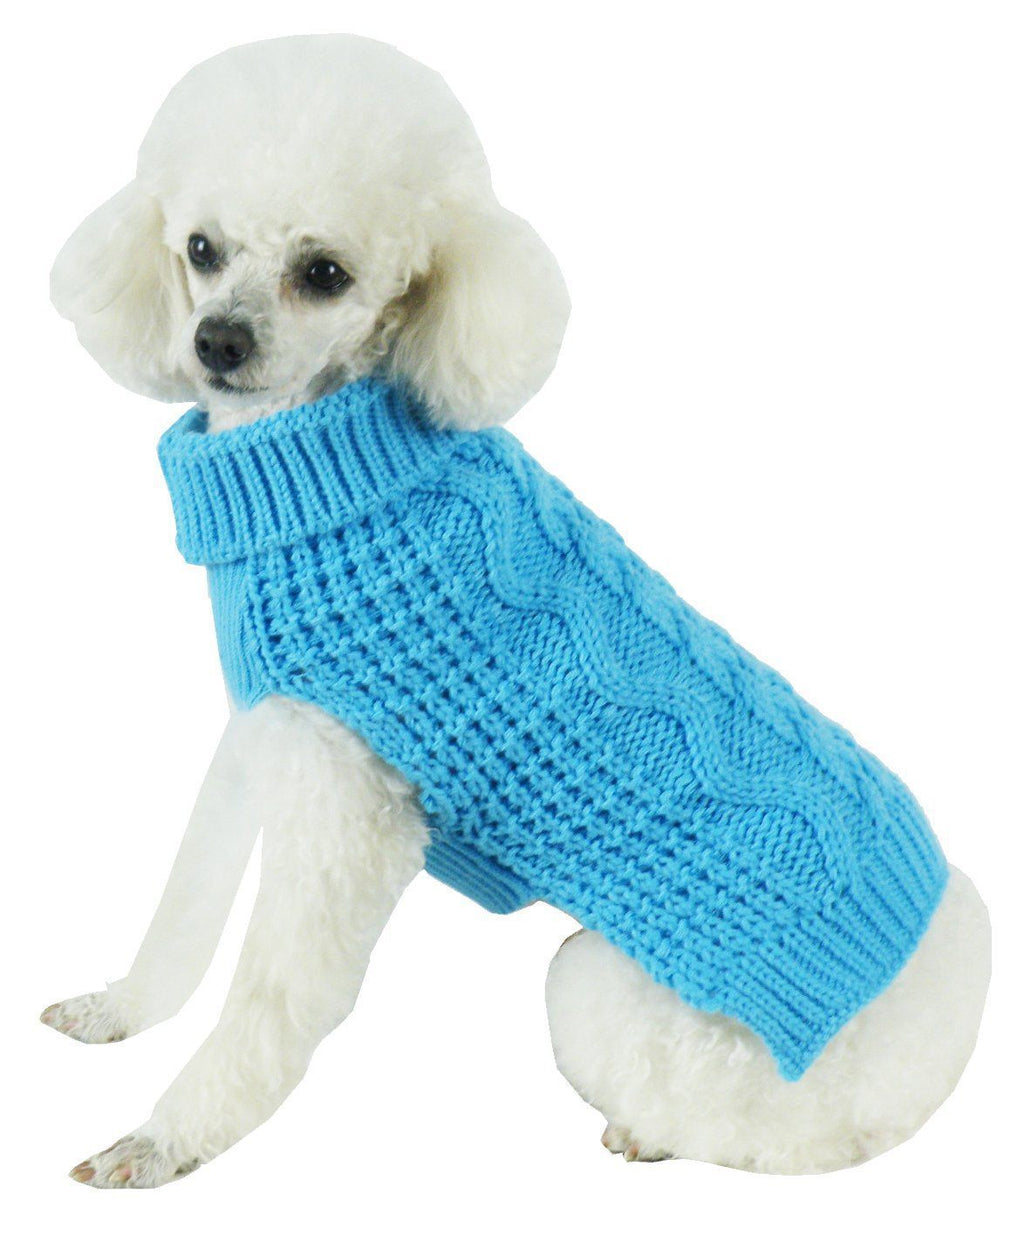 Pet Life ® 'Swivel-Swirl' Heavy Cable Knitted Fashion Designer Dog Sweater X-Small Ligh...